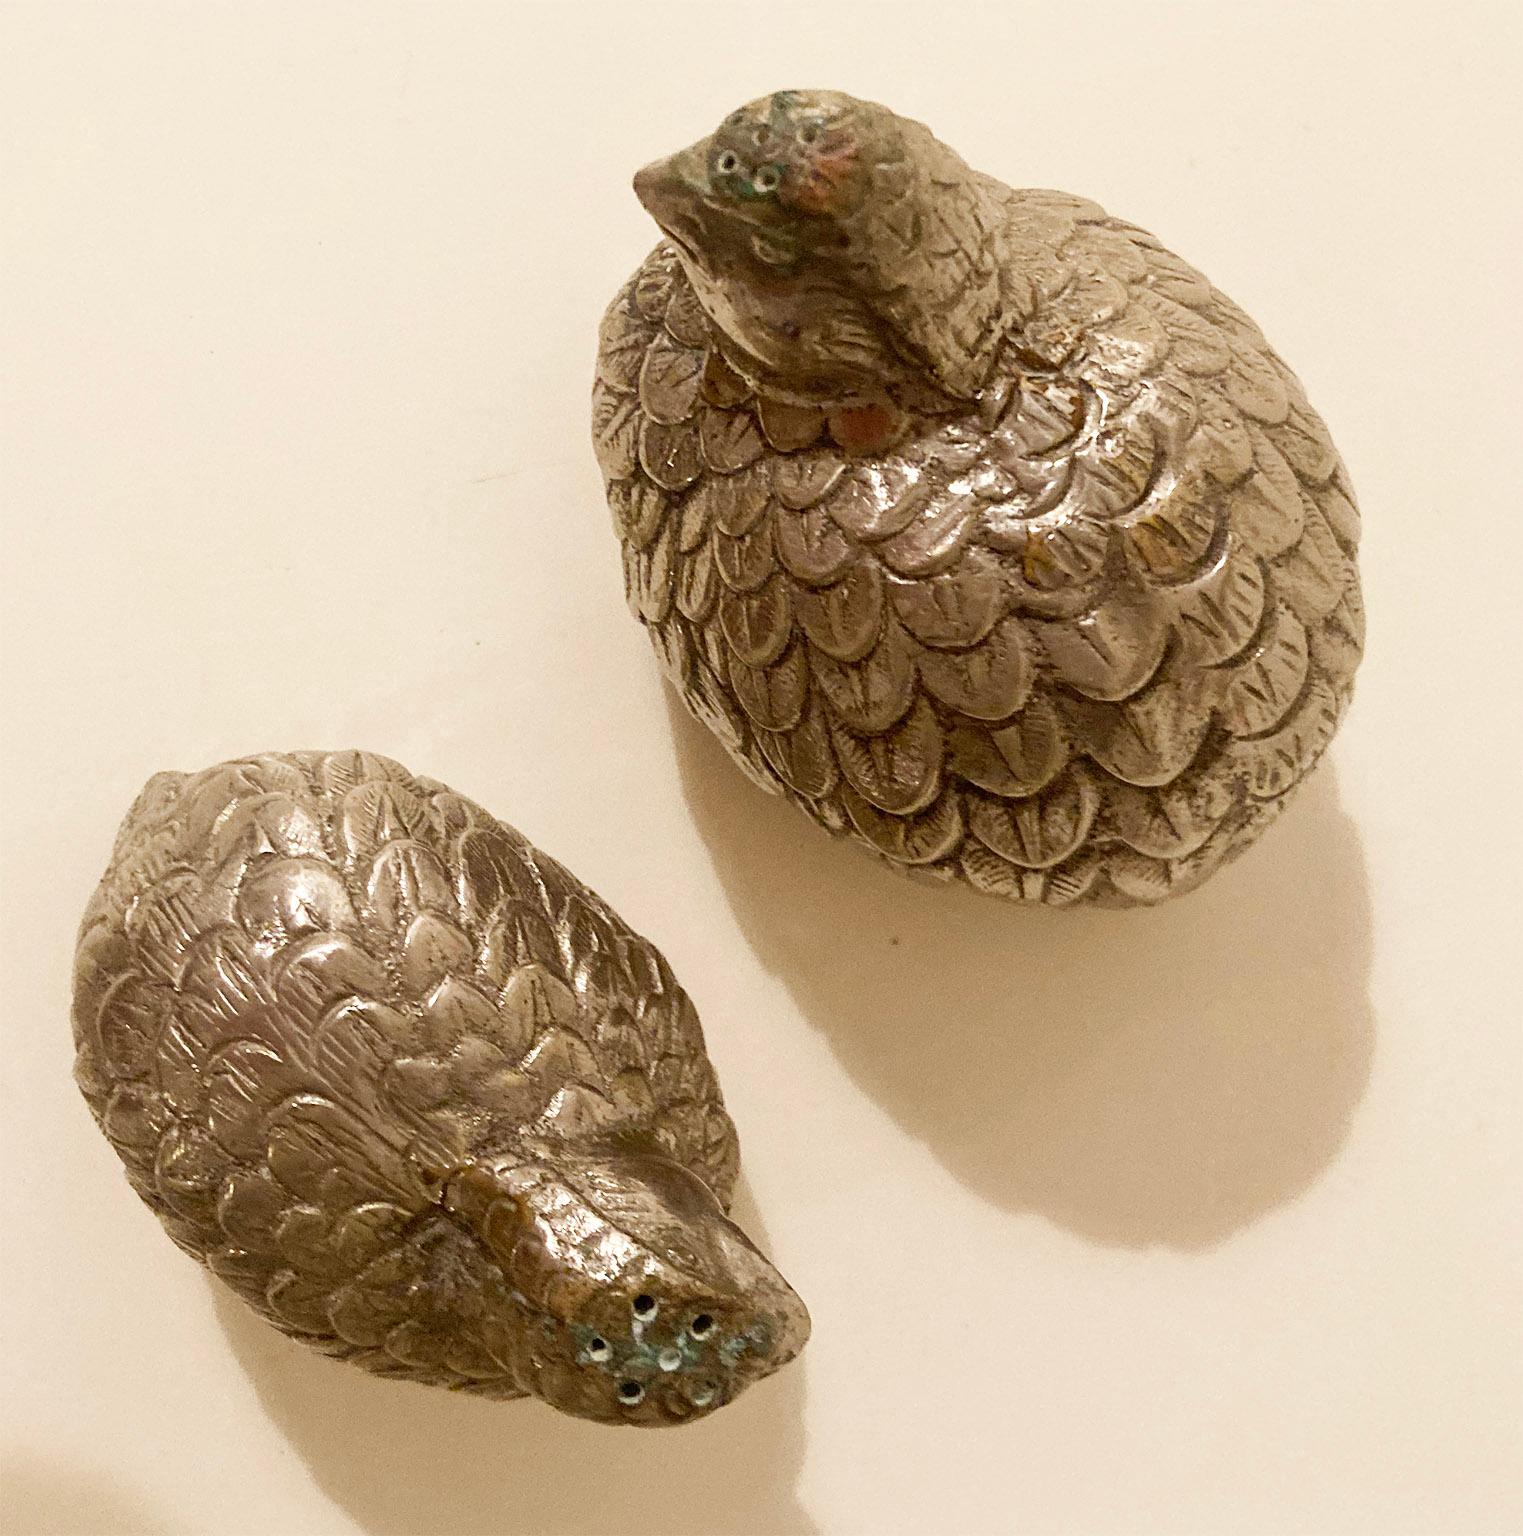 The Quails. Le Quaglie.
Designed by Gucci in 1970ca,
 are an iconic elegant set of salt and pepper shakers in silver plate metal, 
With the shape of quails. 
Engraved mark GUCCI MADE IN ITALY, on the bottom.